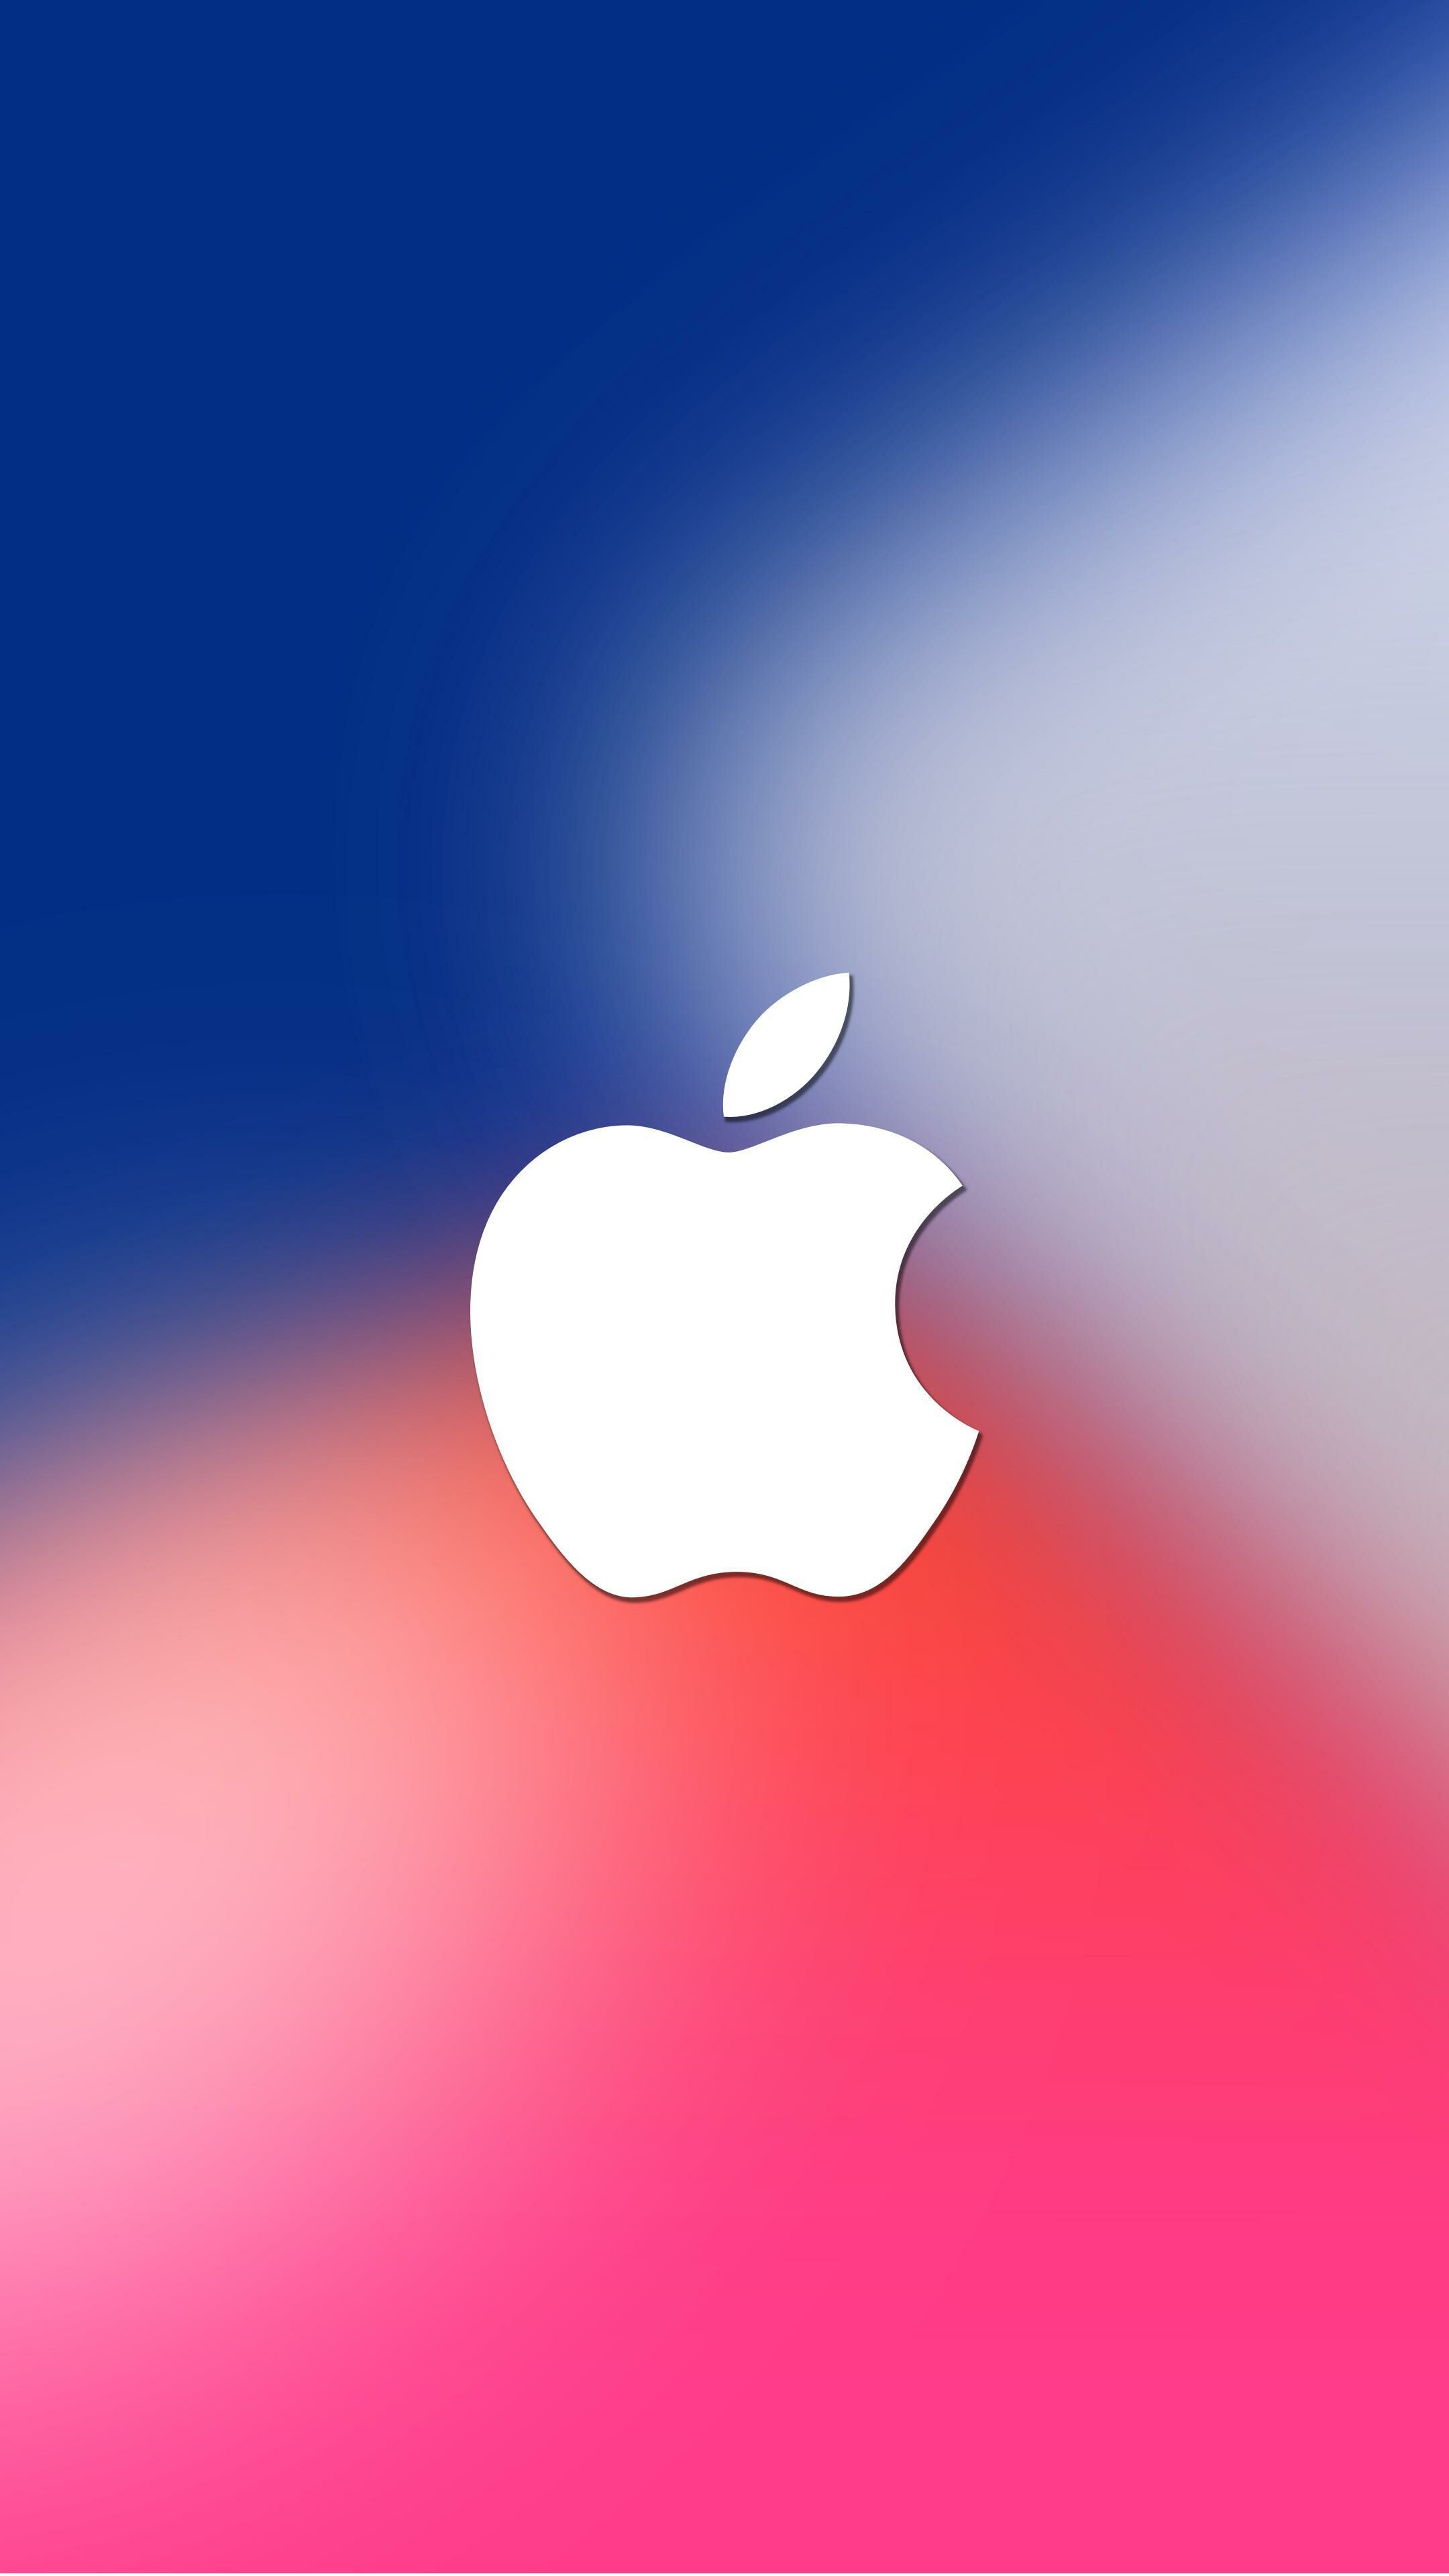 Apple Logo: The falling fruit that led Sir Isaac Newton to the concept of gravity, Trademark. 2160x3840 4K Background.